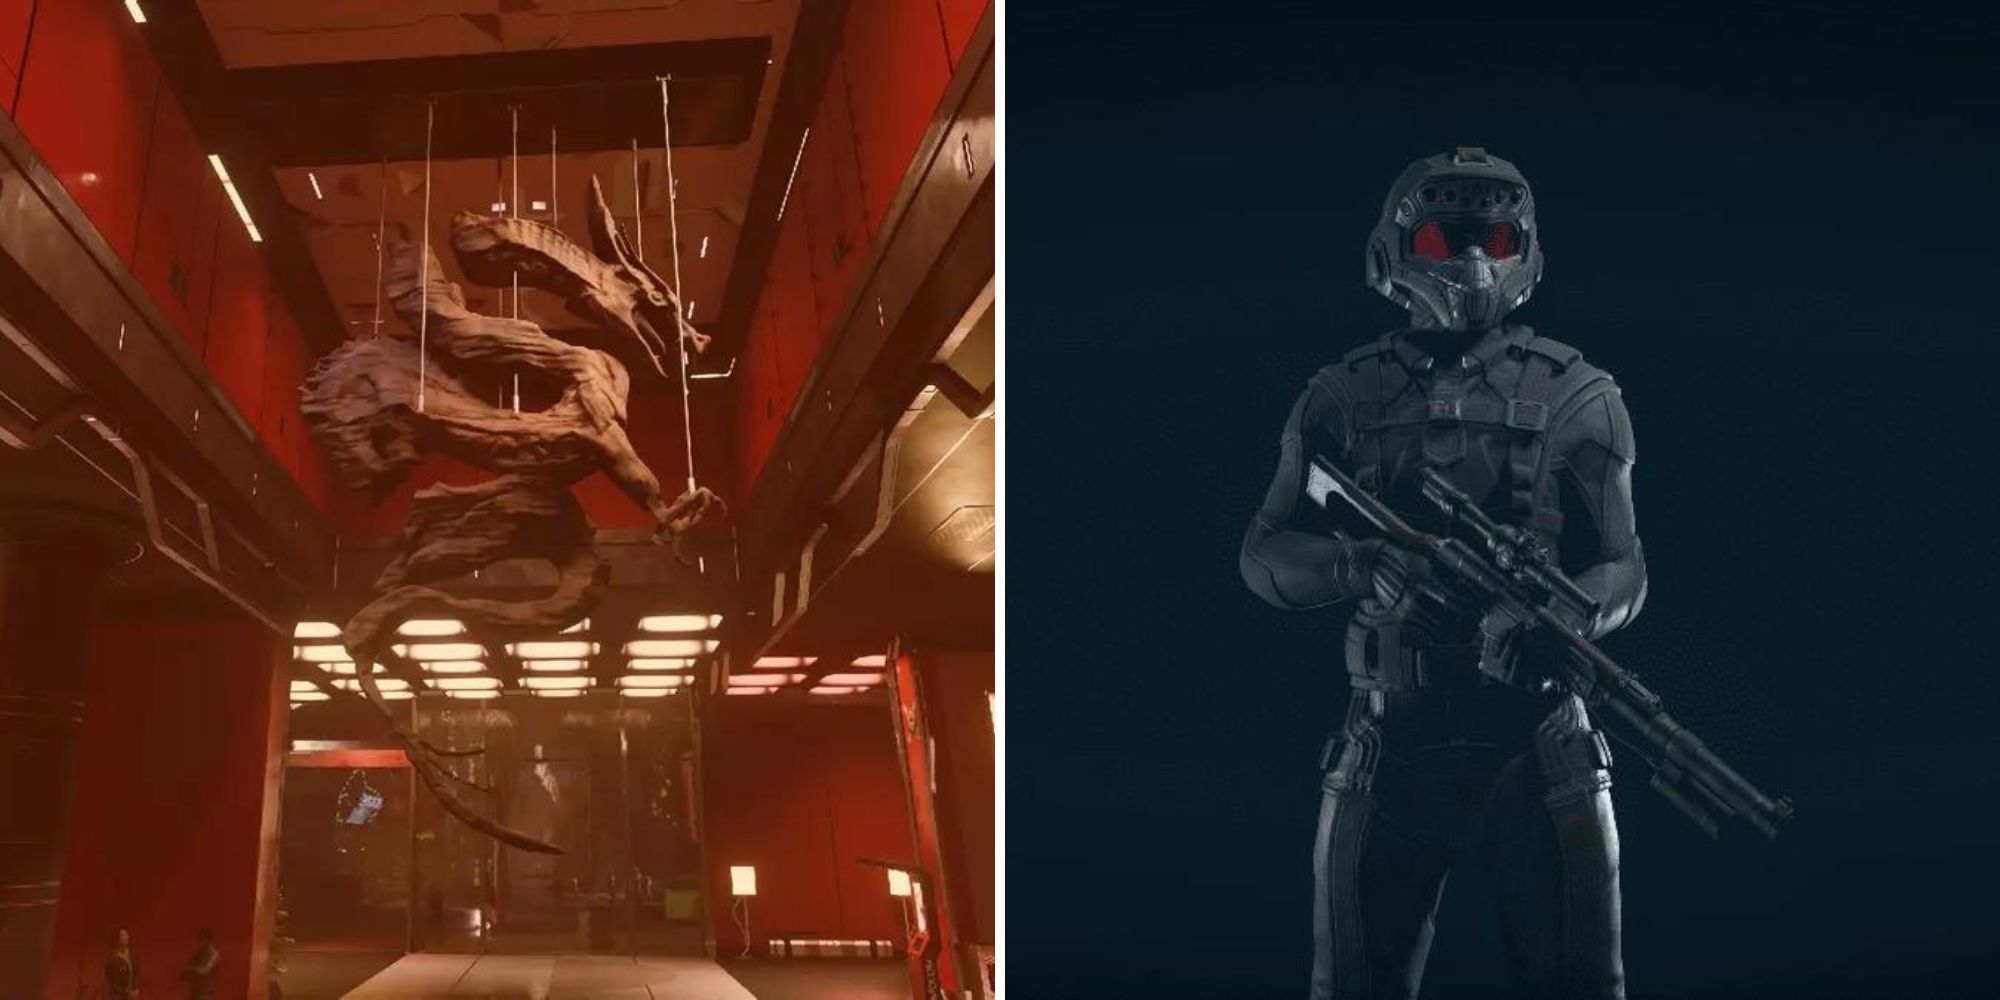 The Ryujin Logo & The Operative Suit